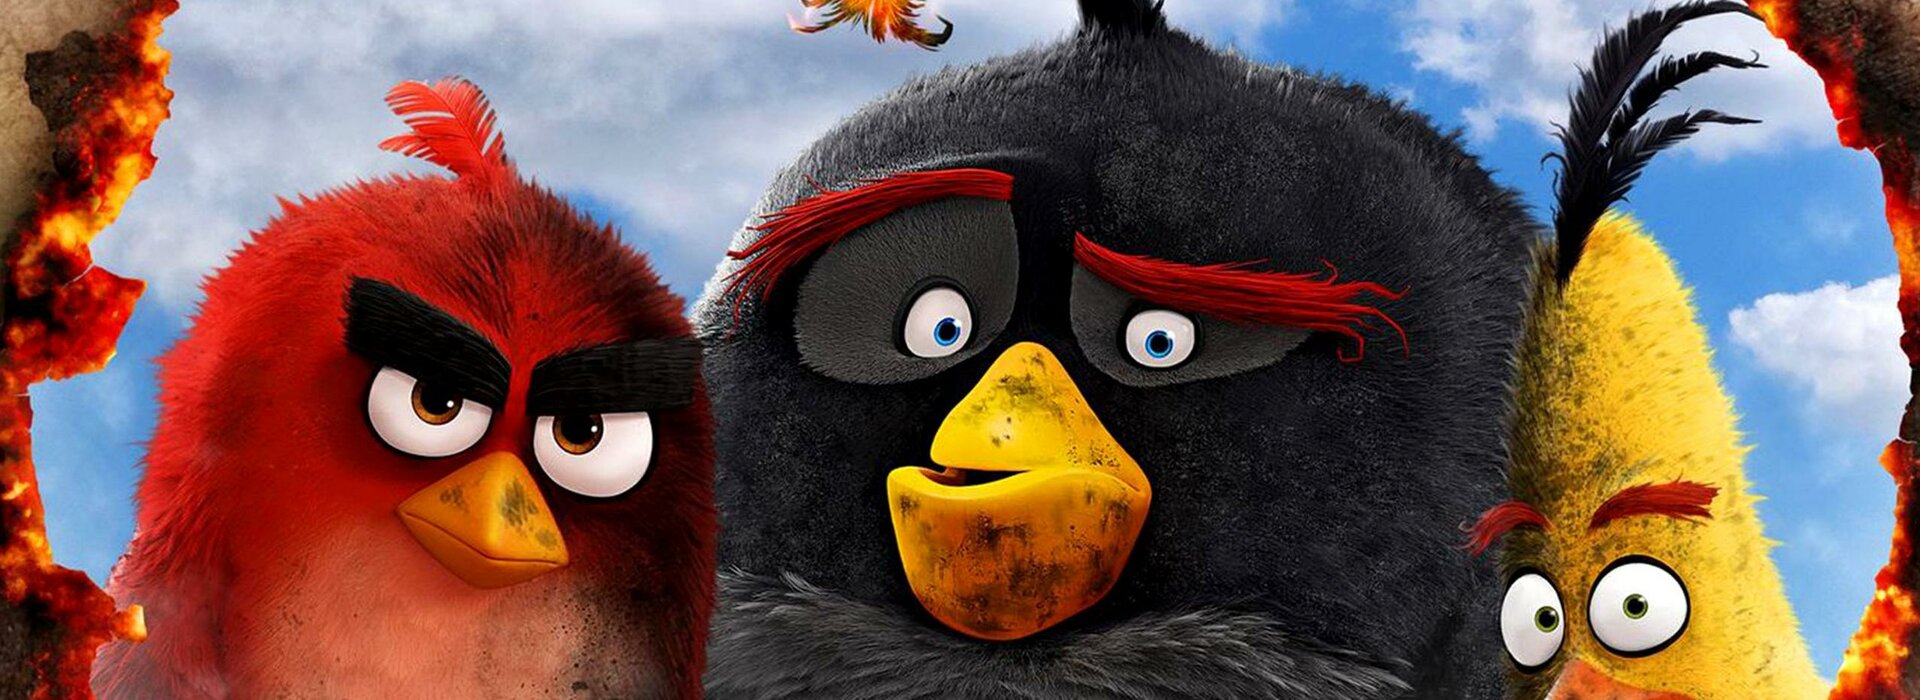 Angry Birds – Der Film | © Sony Pictures